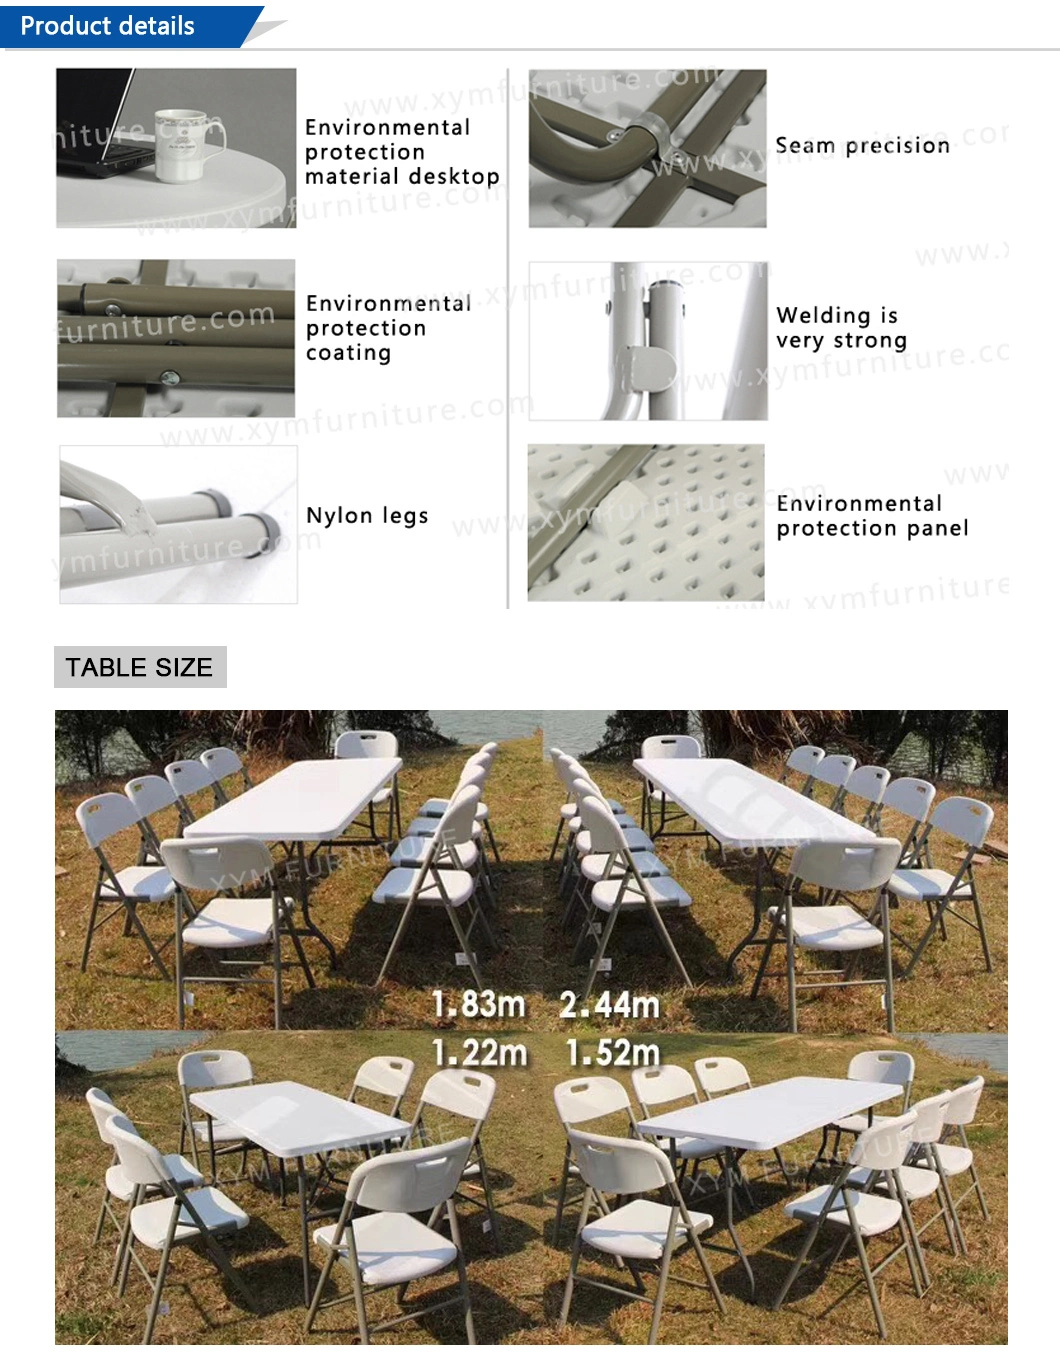 Chinese Supplier Outdoor and Indoor Folding Plastic Table (XYM-T66)